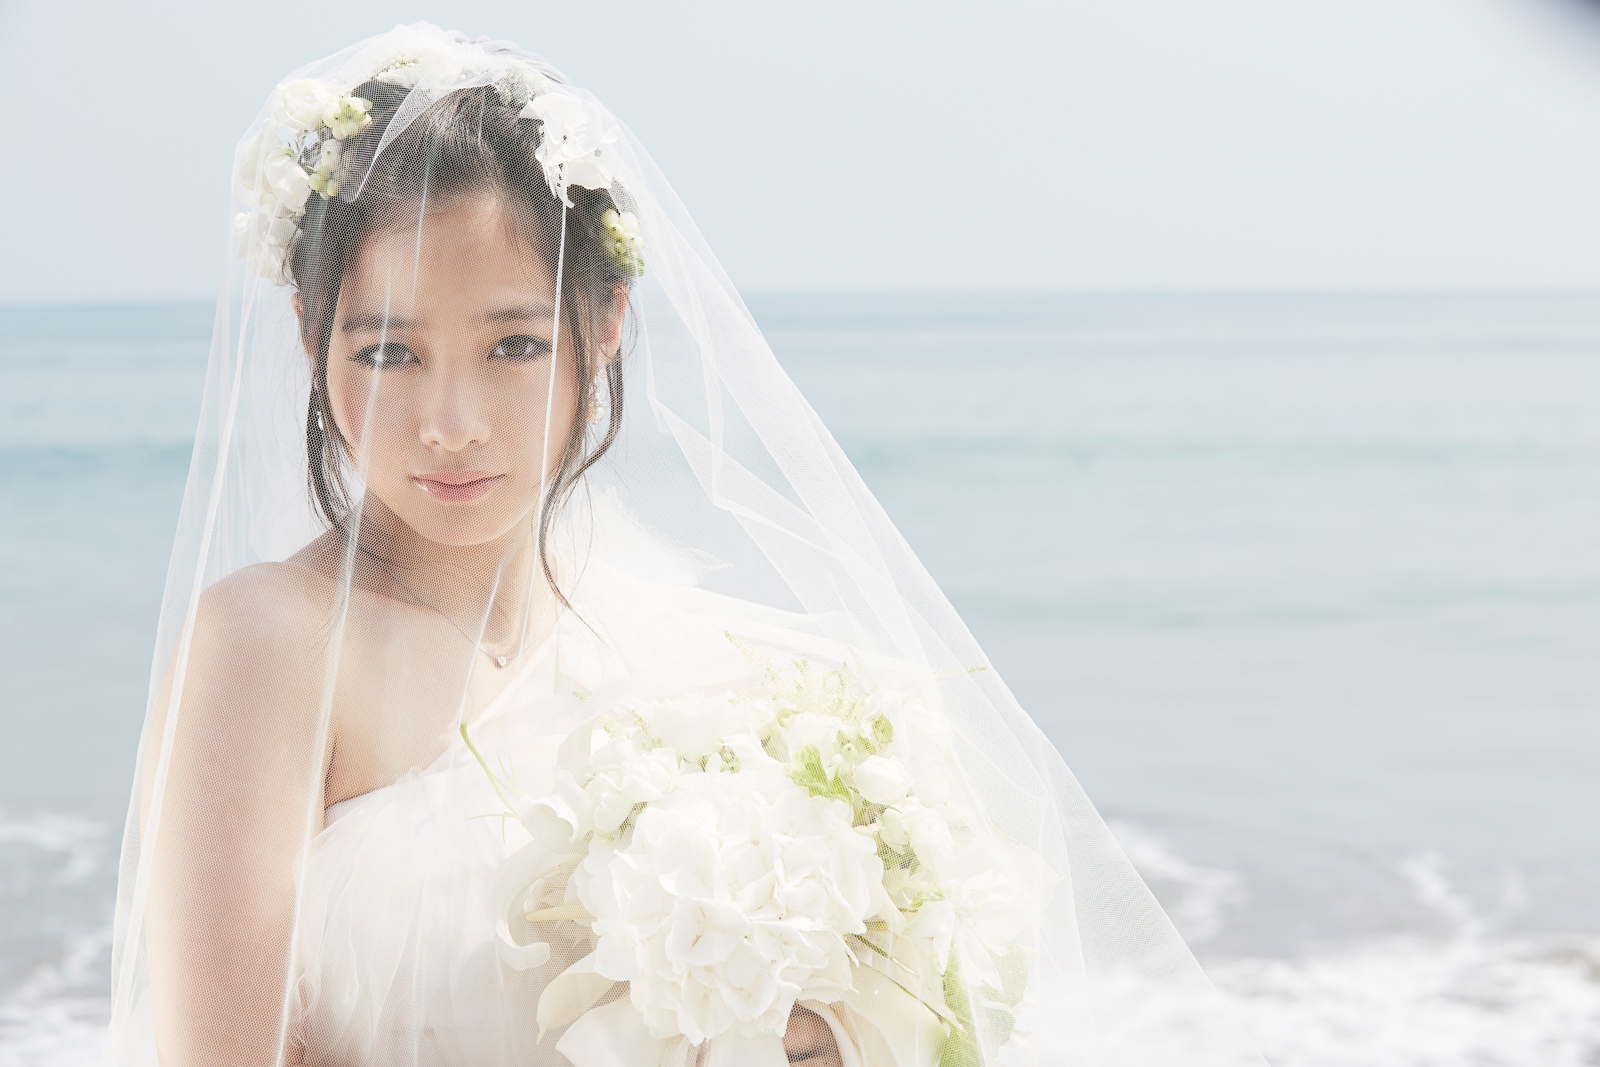 Kanna Hashimoto’s FIrst Photo Collection – A Rare Chance to See Her in a Wedding Dress!